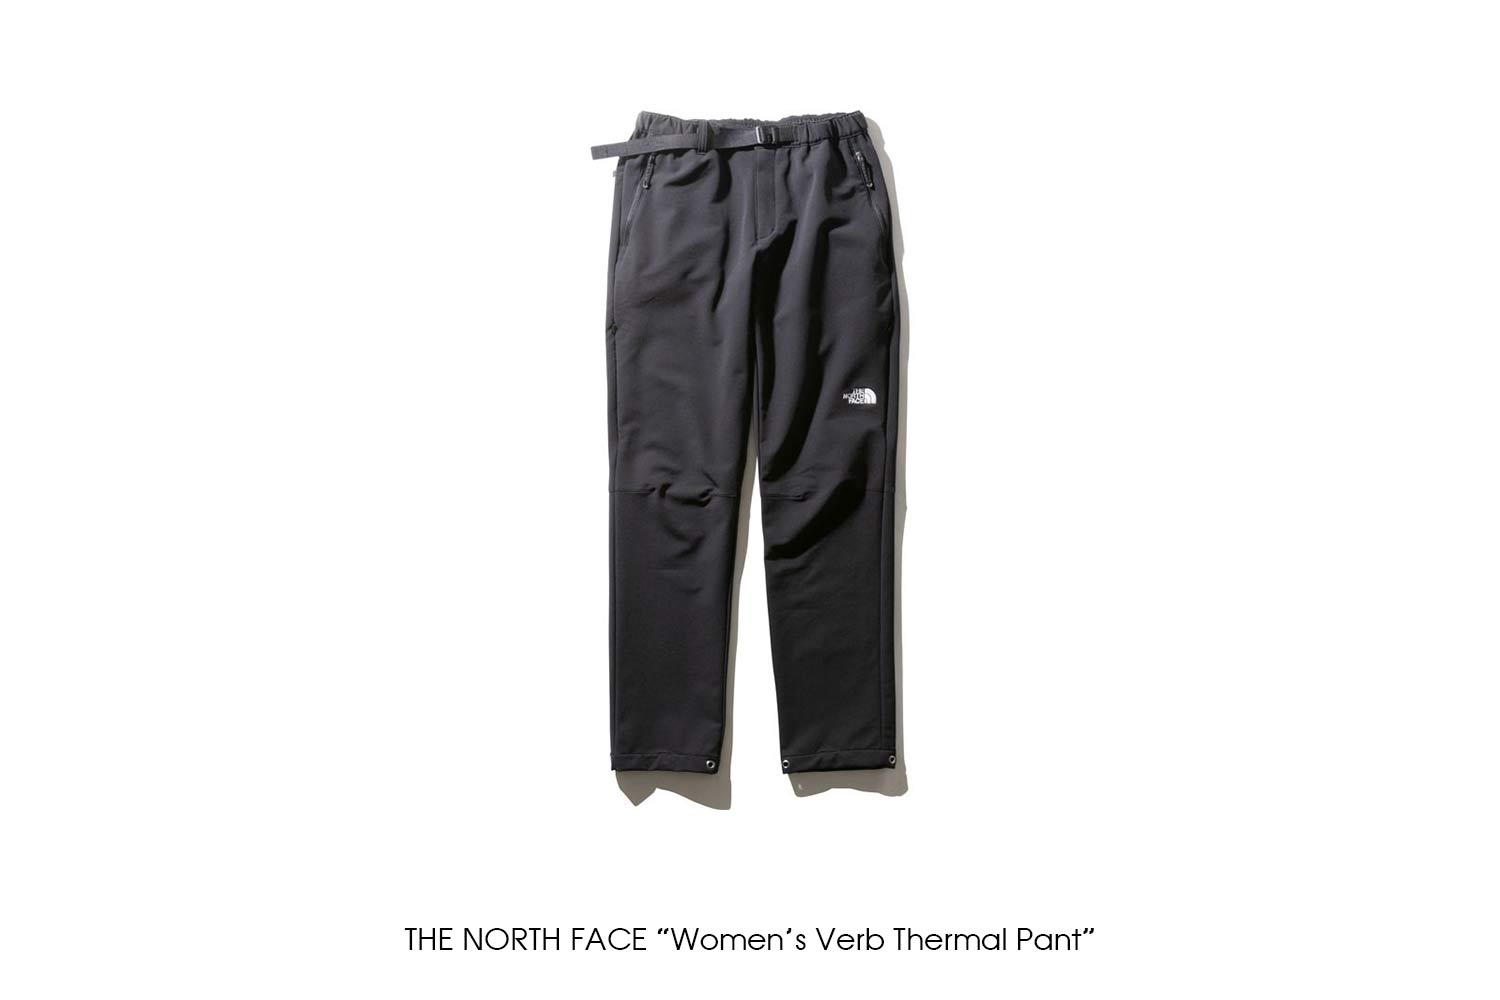 THE NORTH FACE "Women's Verb Thermal Pant"